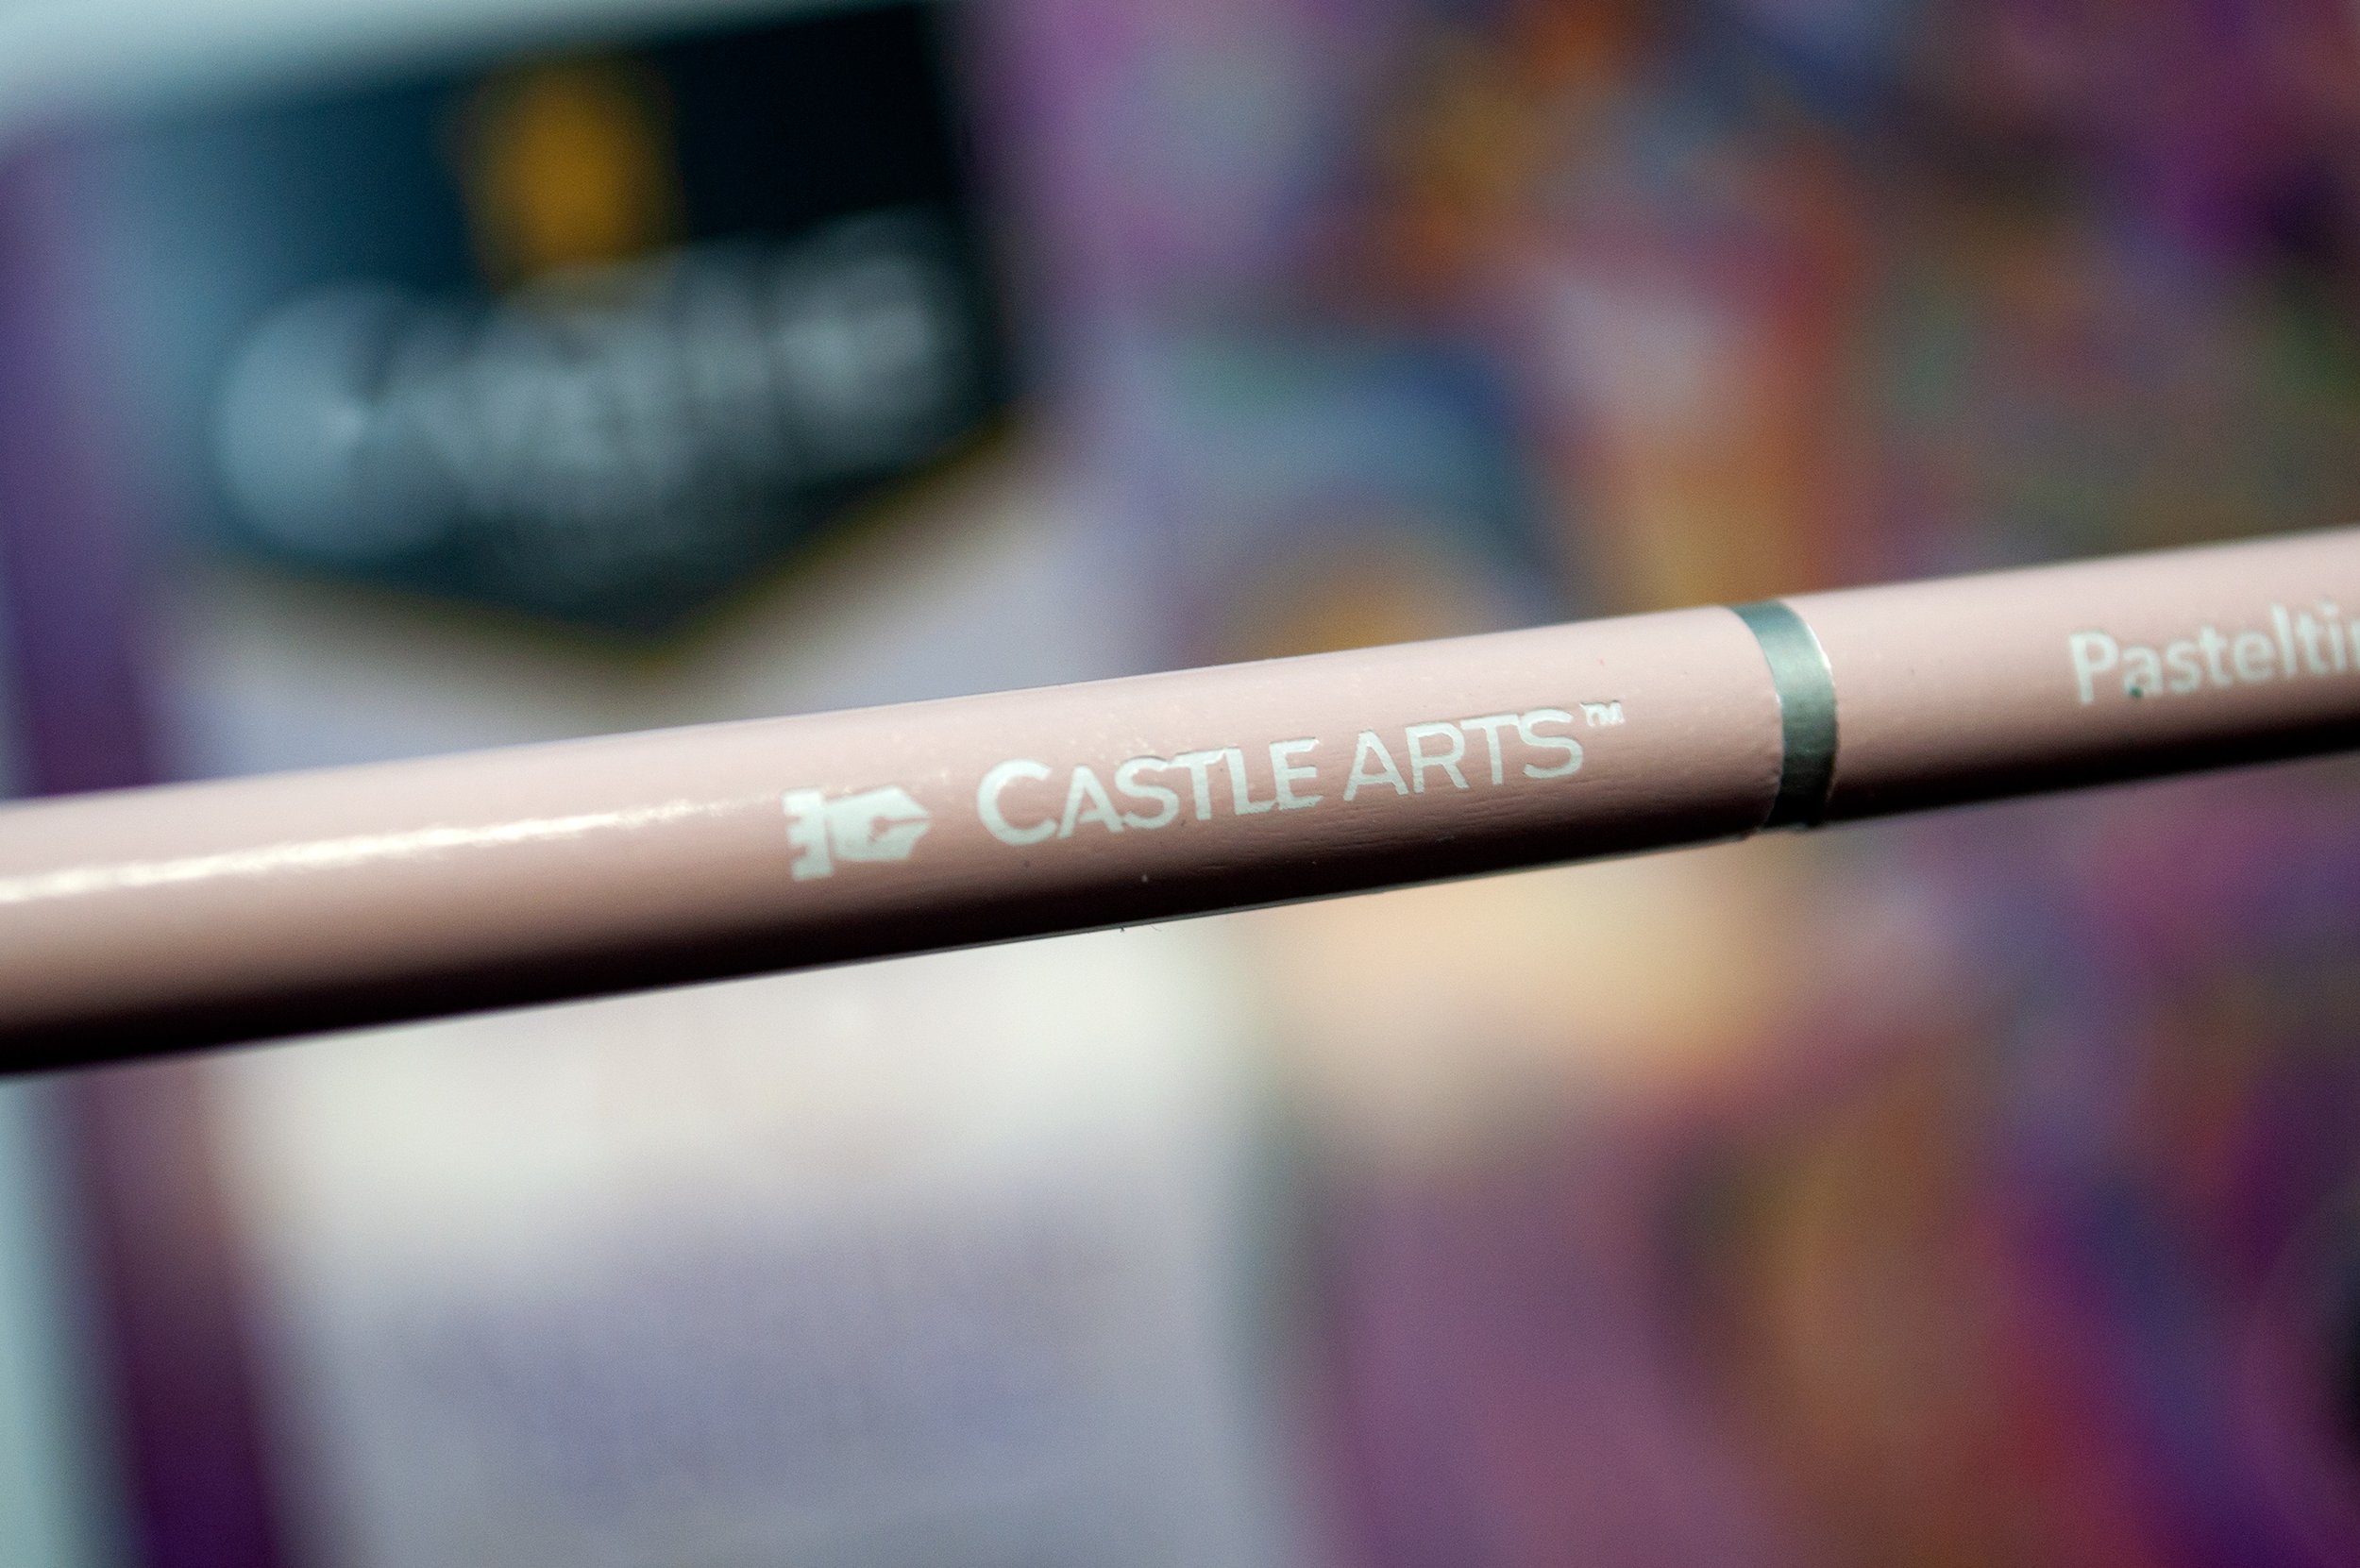  Castle Art Supplies Gold Standard 120 Coloring Pencils Set  with Extras, Quality Oil-based Colored Cores Stay Sharper, Tougher Against  Breakage, For Adult Artists, Colorists